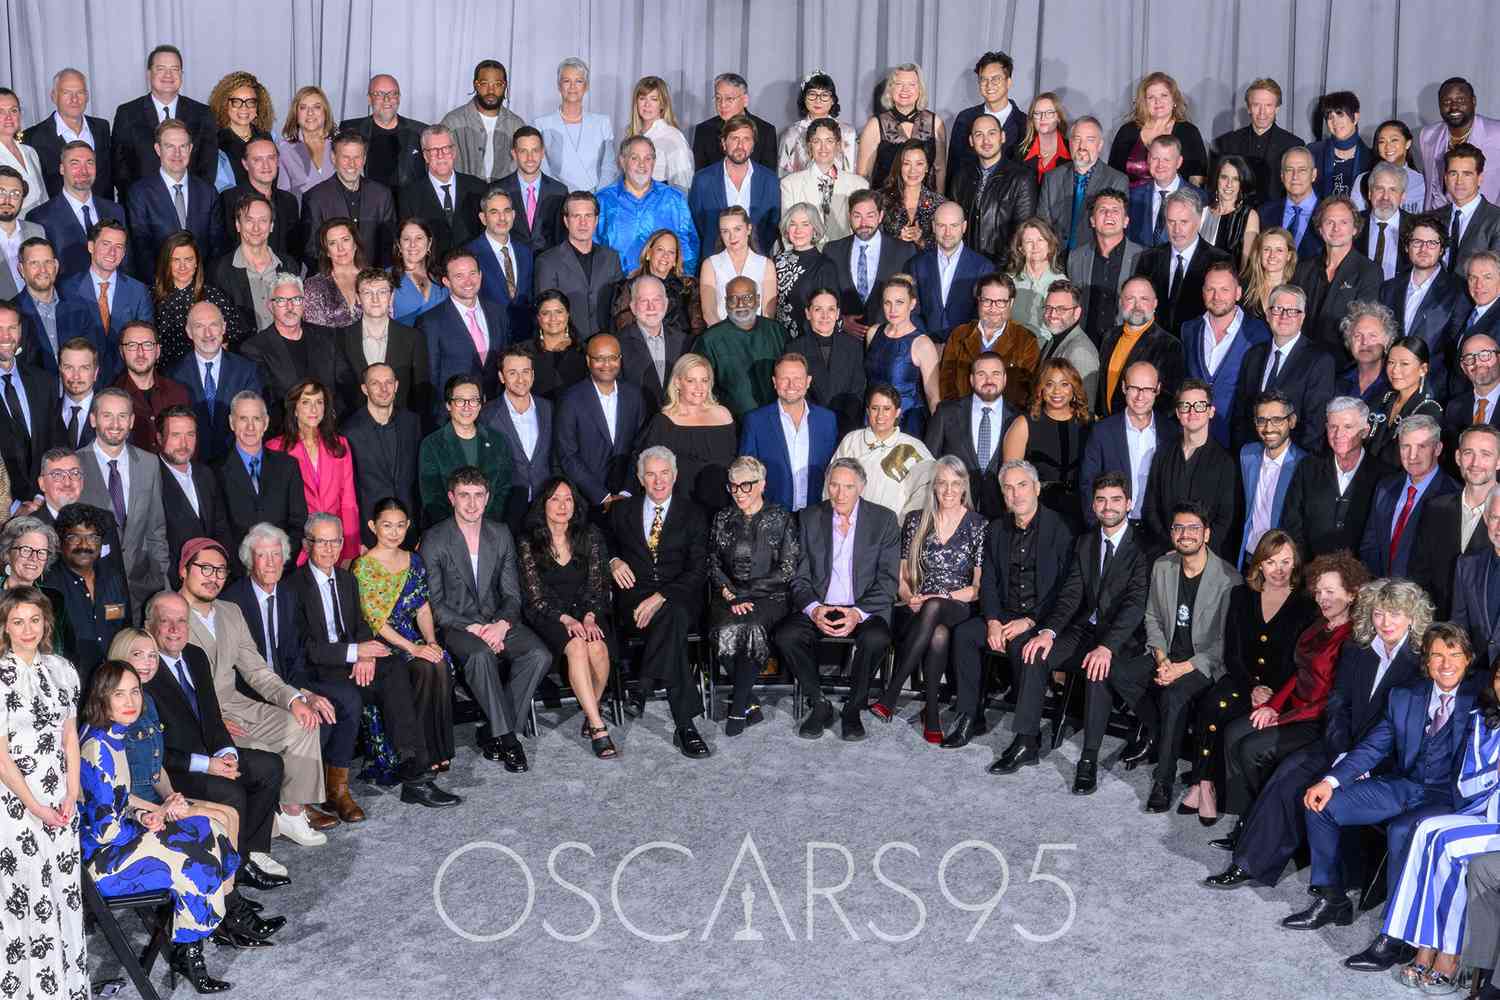 See the 2023 Oscar nominees class photo